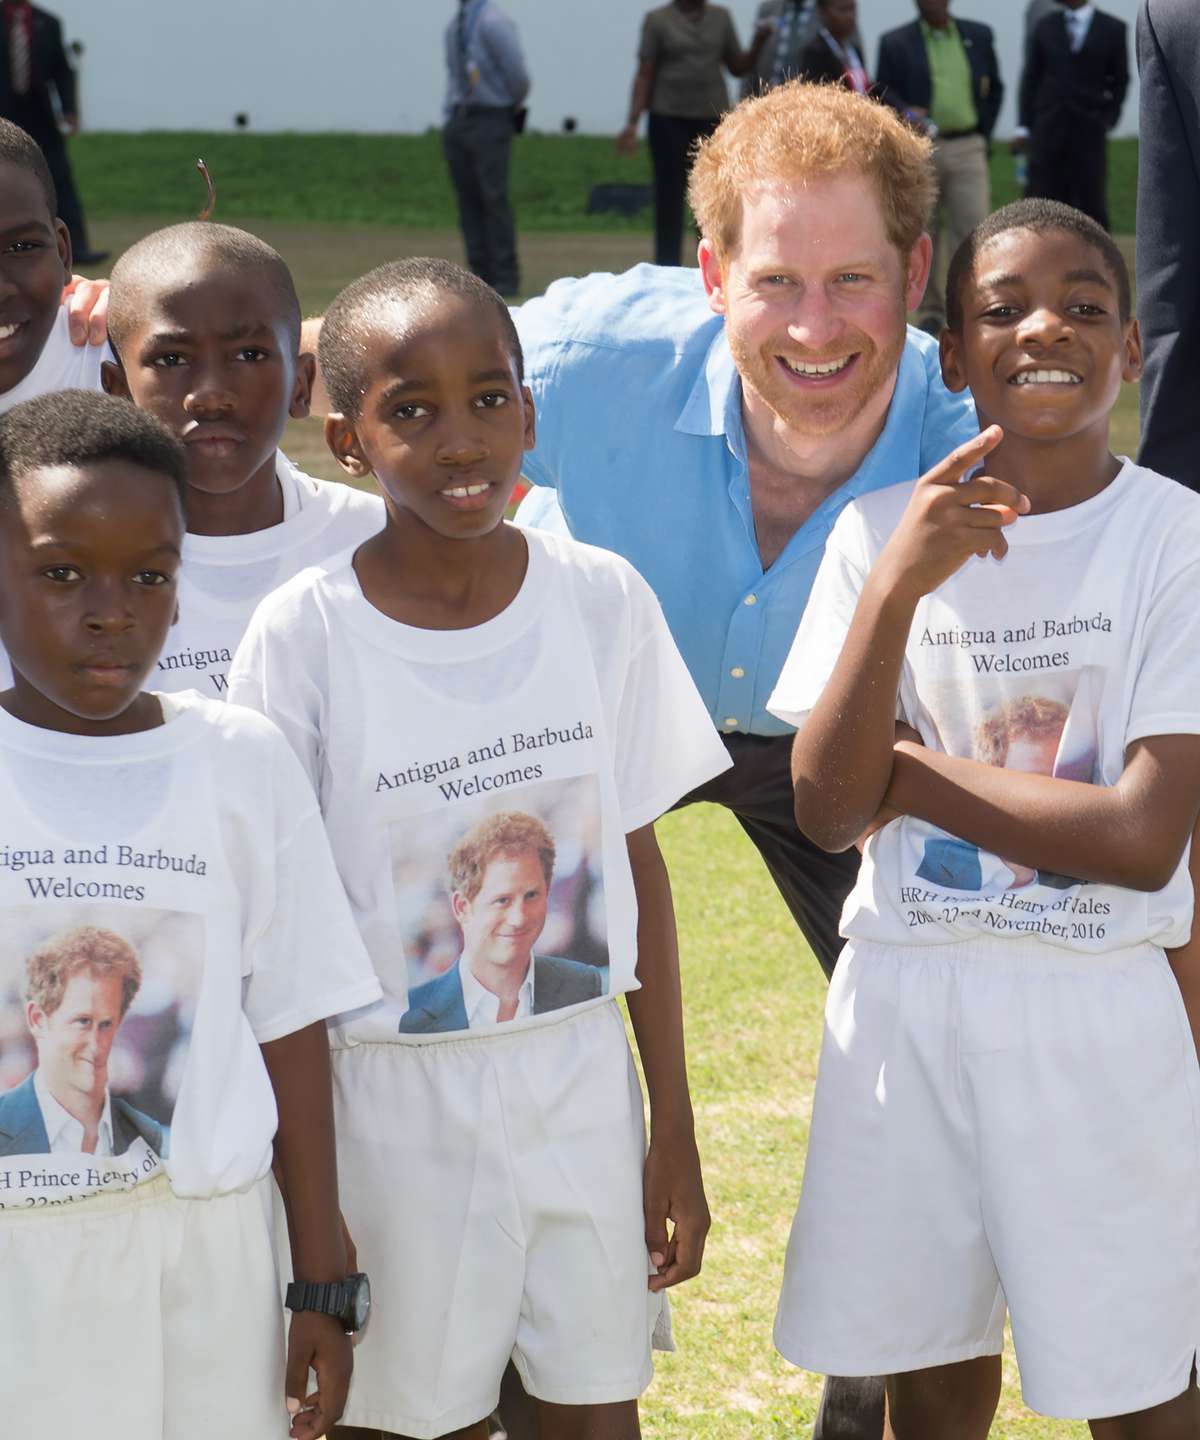 Prince Harry in Caribbean with Kids - LEAD